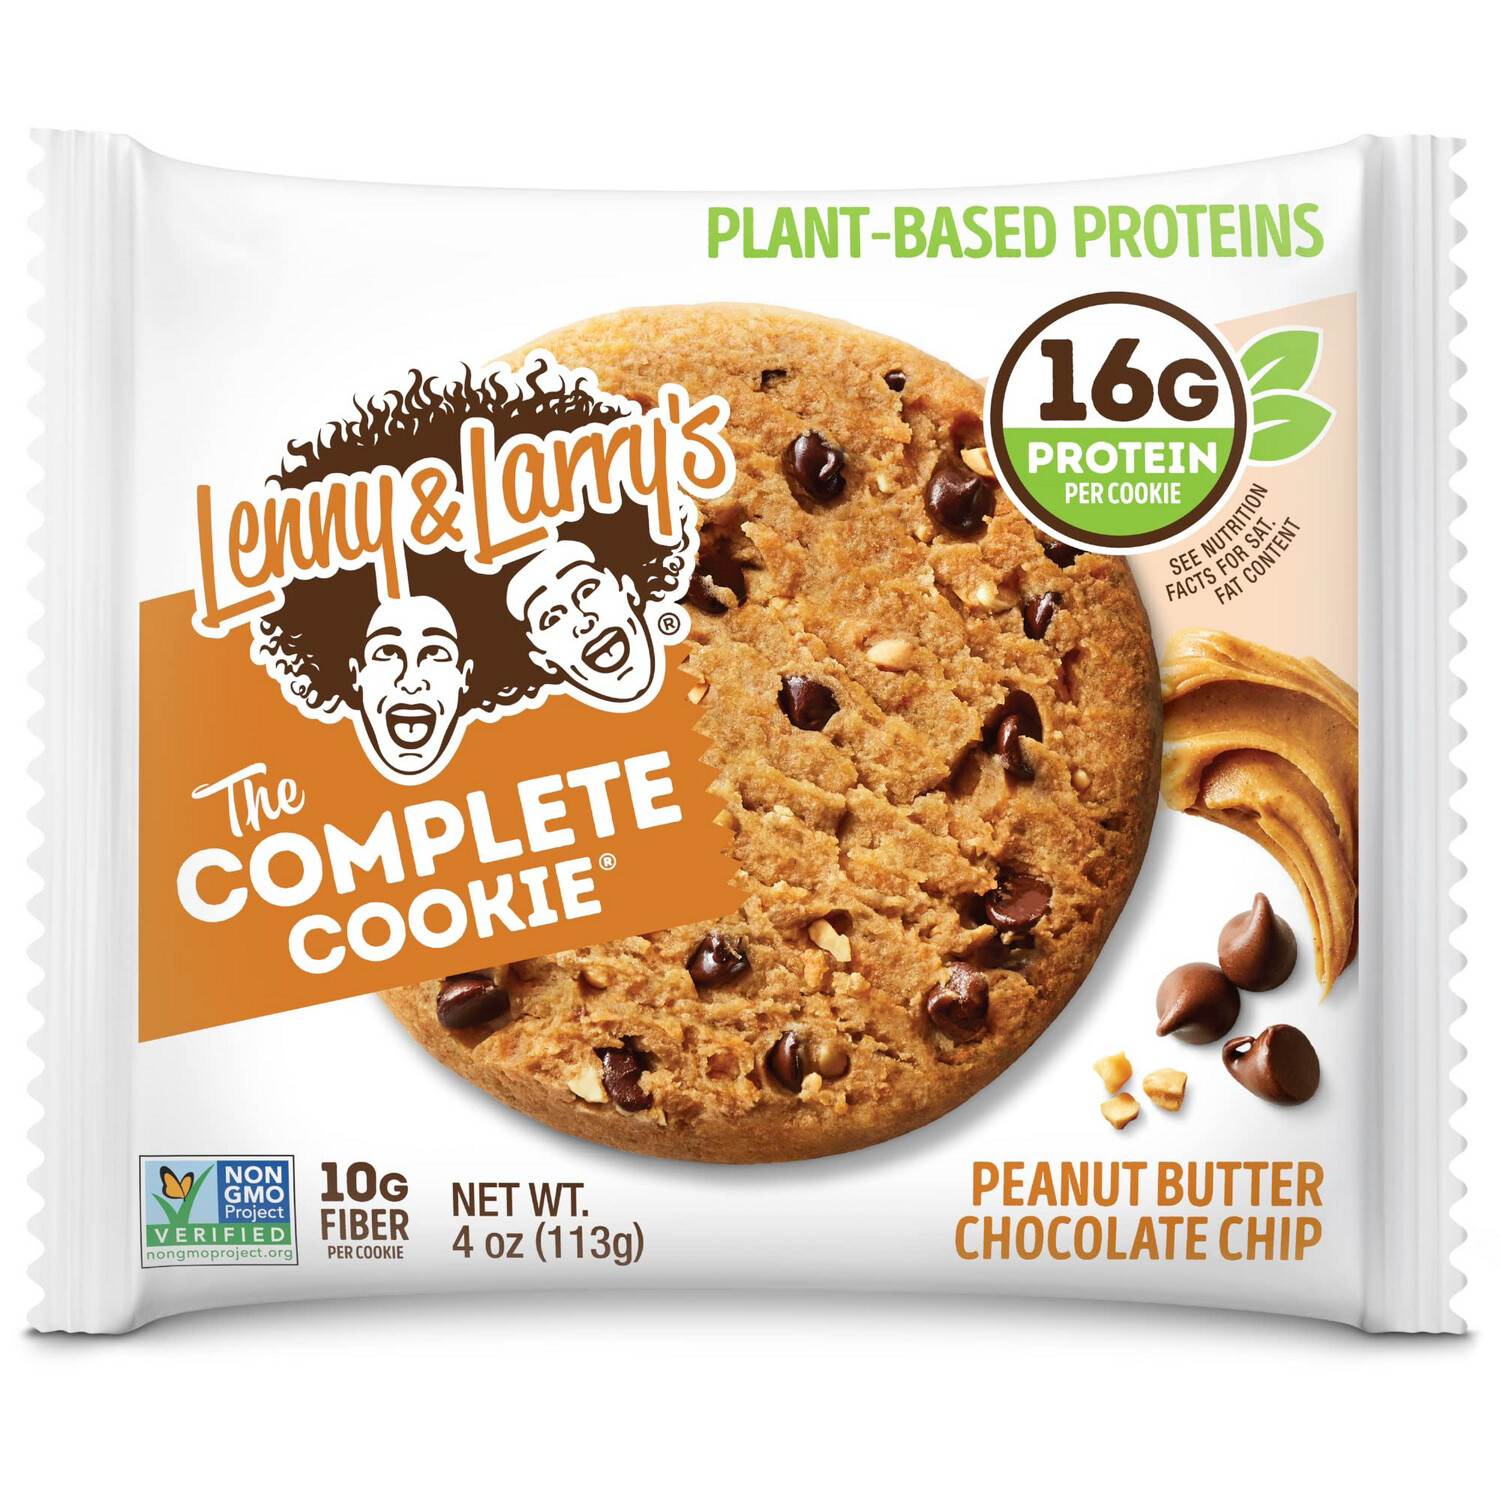 Lenny &amp; Larry’s The Complete Cookie Peanut Butter Plant Based 16 g Protein Vegan 